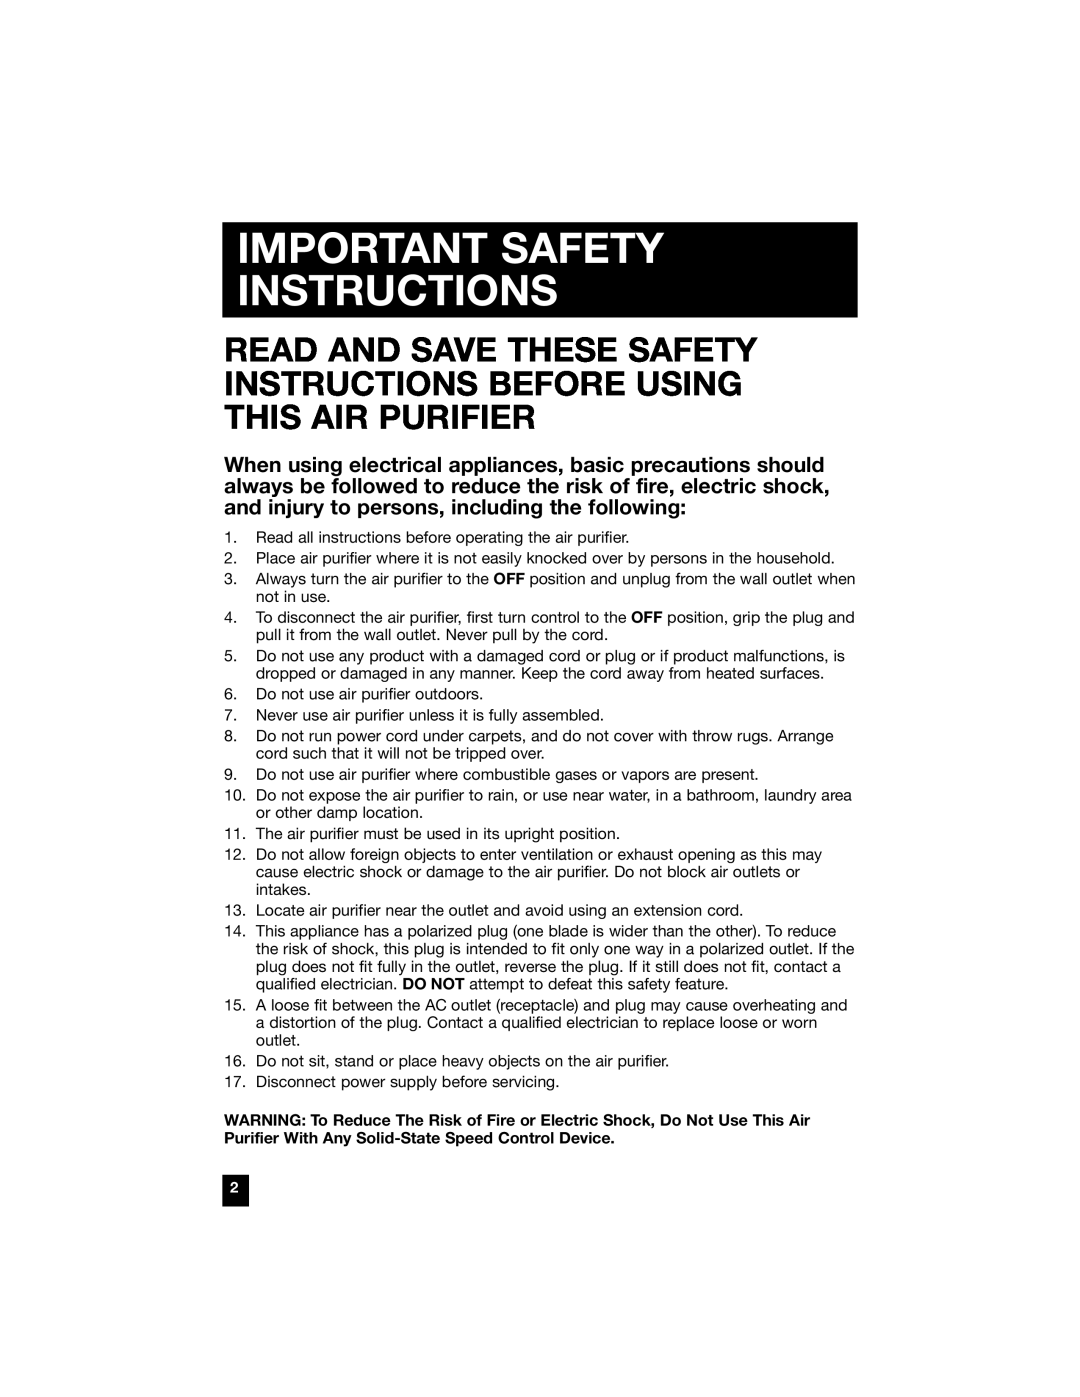 Honeywell 50200, 50100, 50300, 50150, 50250 manual Important Safety Instructions 